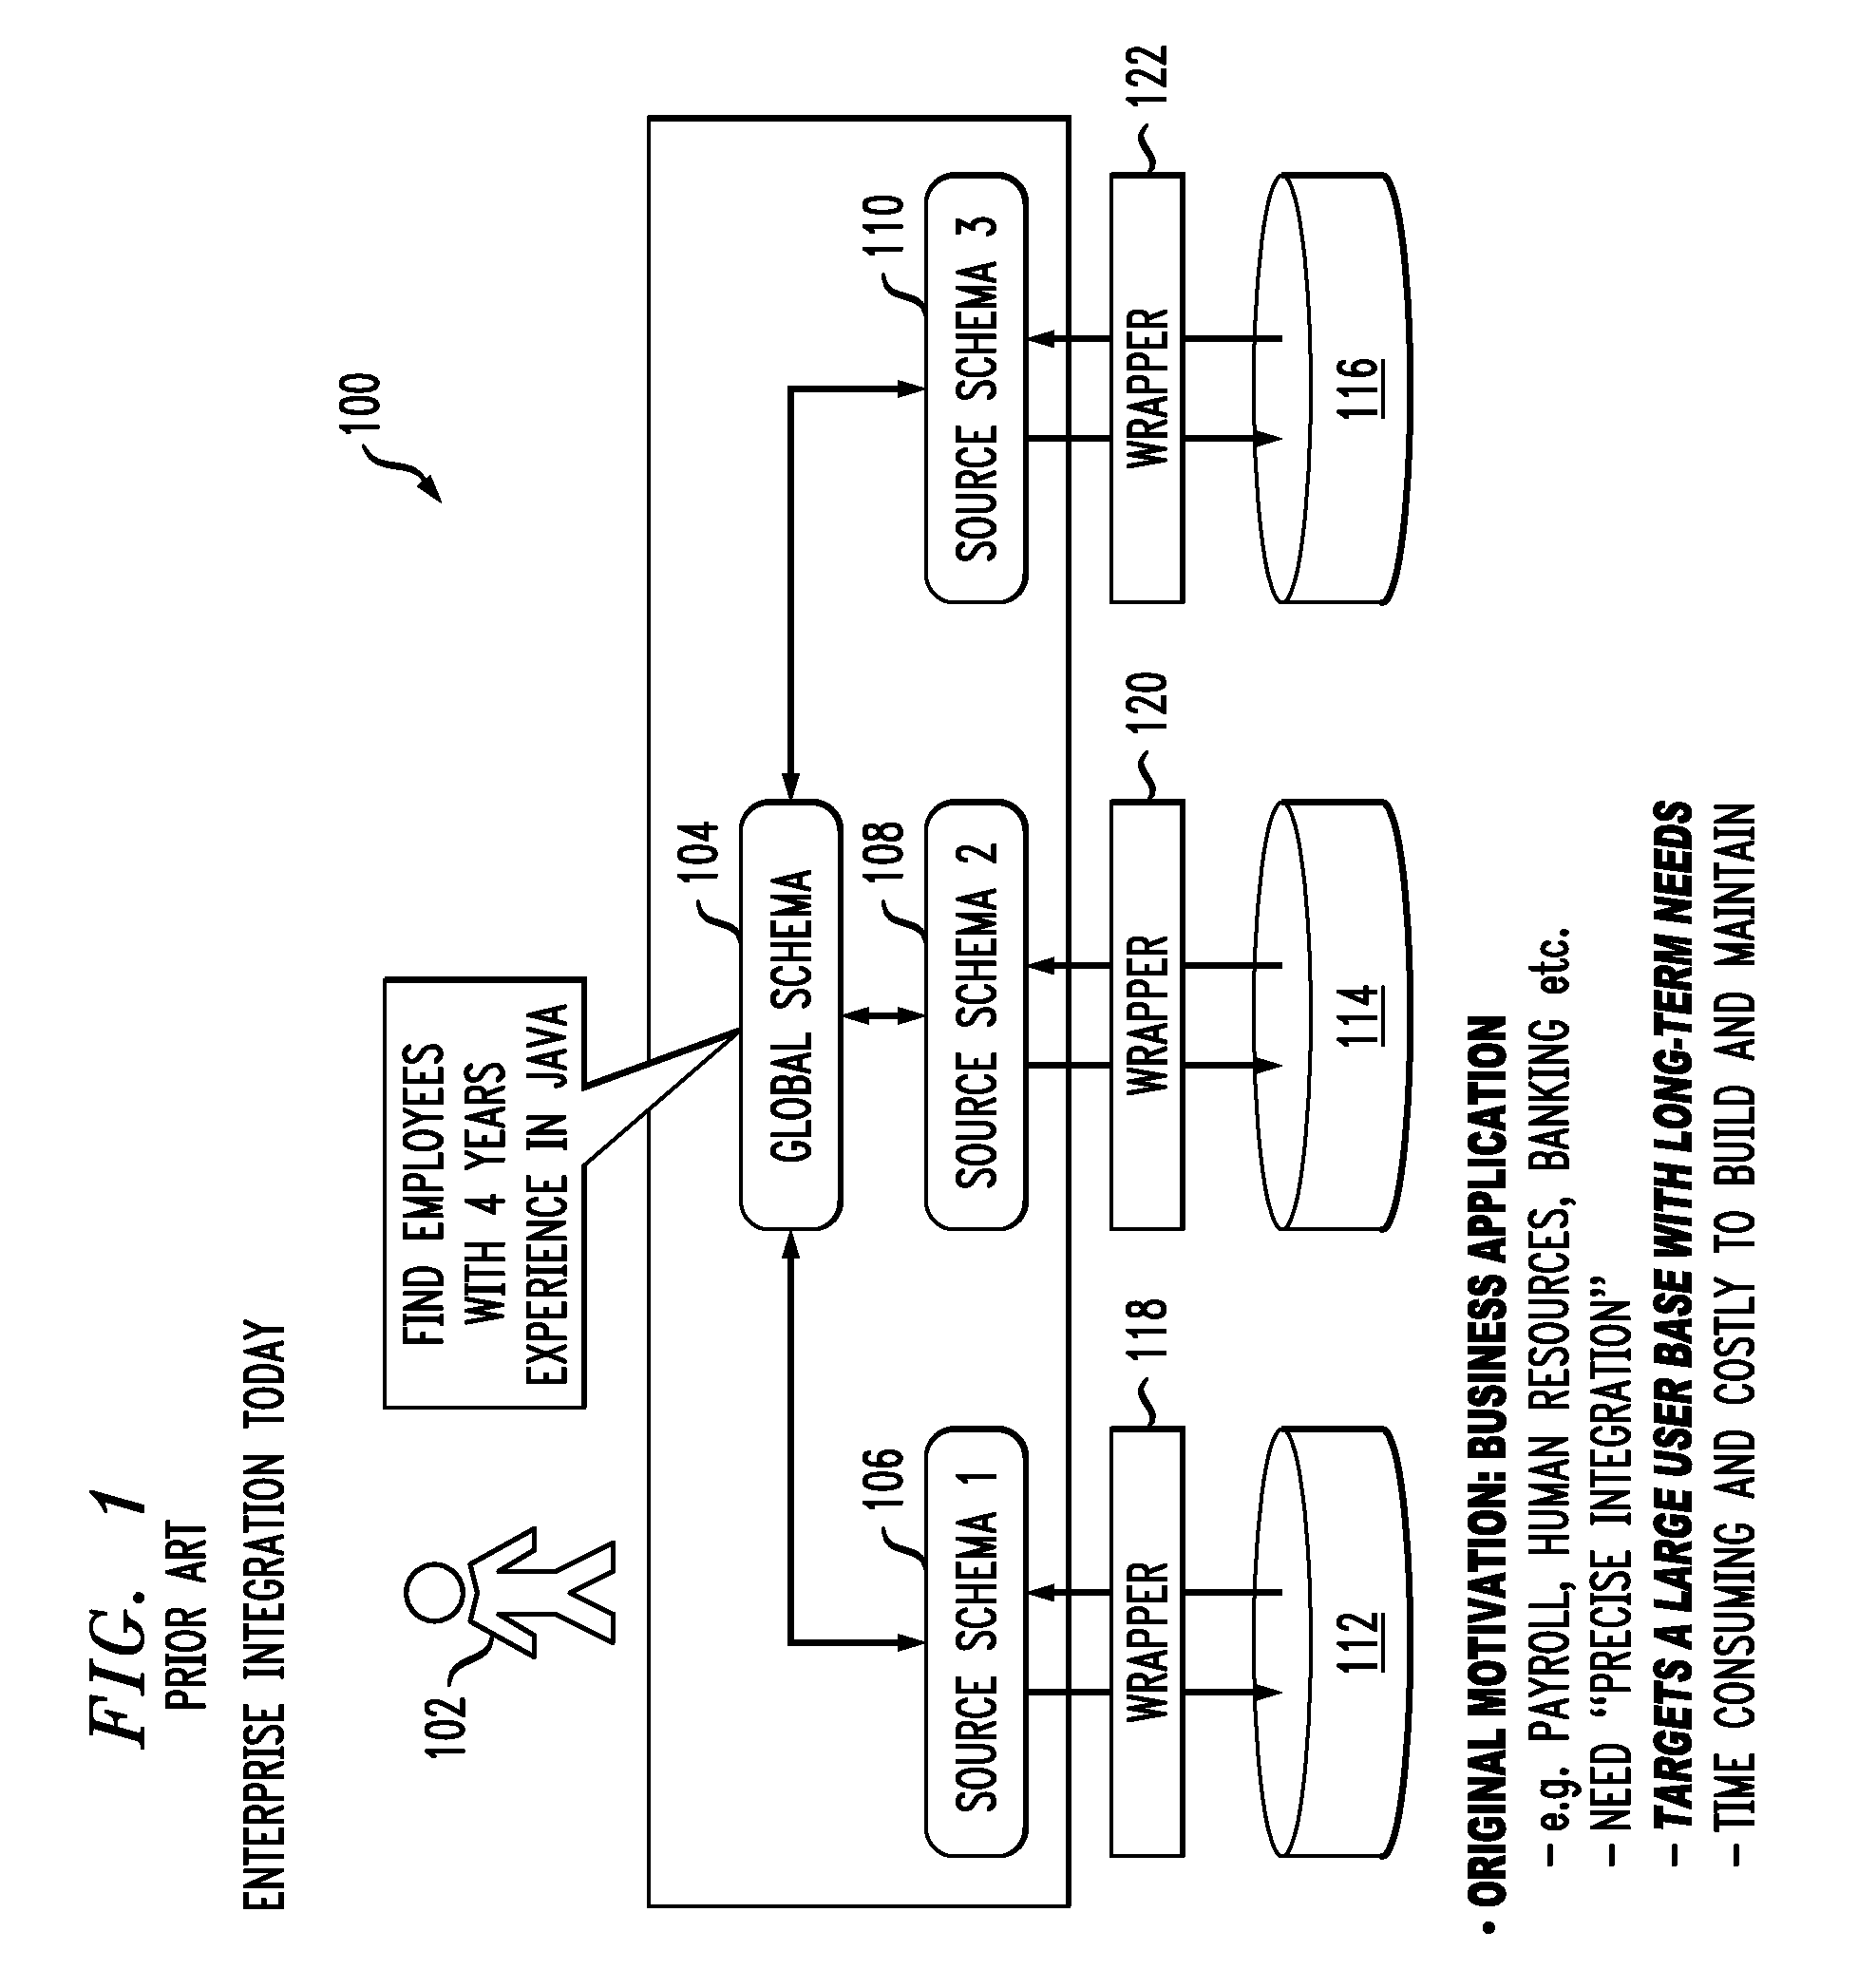 Method for assembly of personalized enterprise information integrators over conjunctive queries